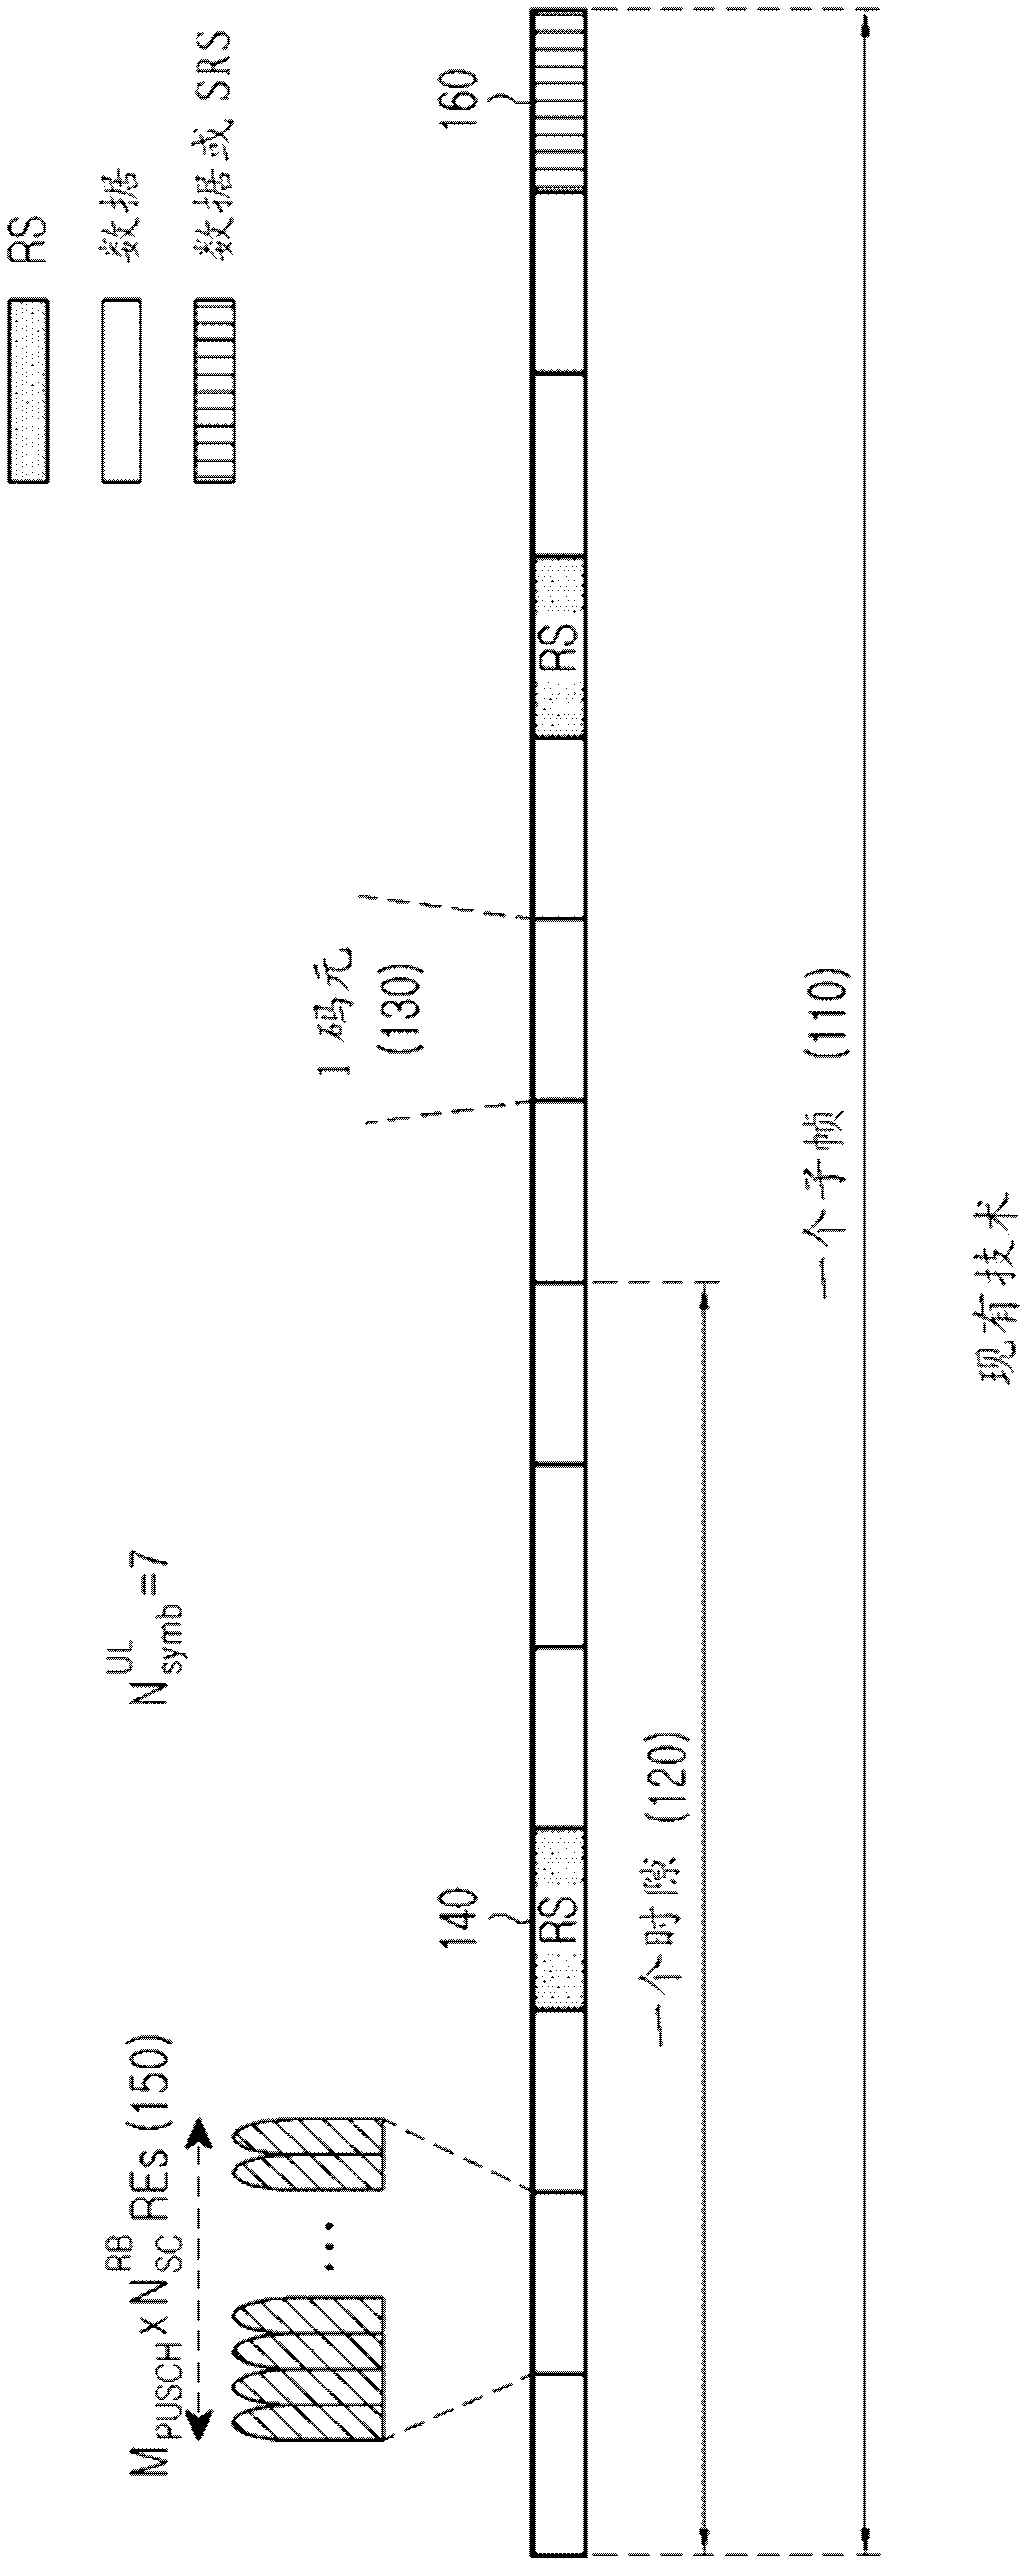 Uplink transmission power control in multi-carrier communication systems